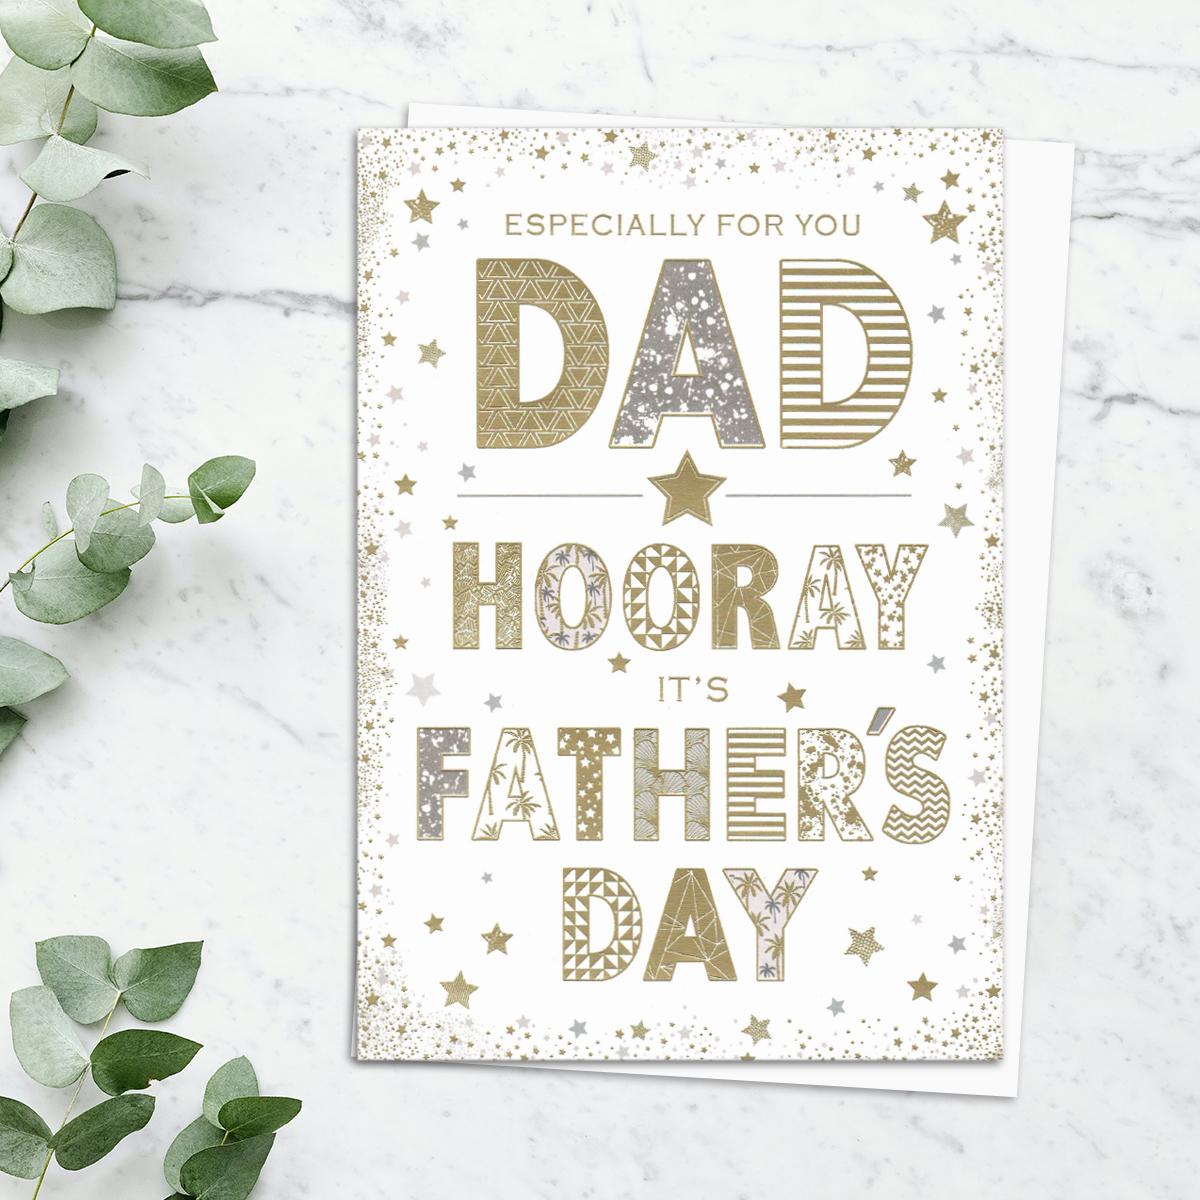 'Especially For You Dad Hooray It's Father's Day' Card With Stunning Gold Foiled Lettering And Stars. Complete With White Envelope